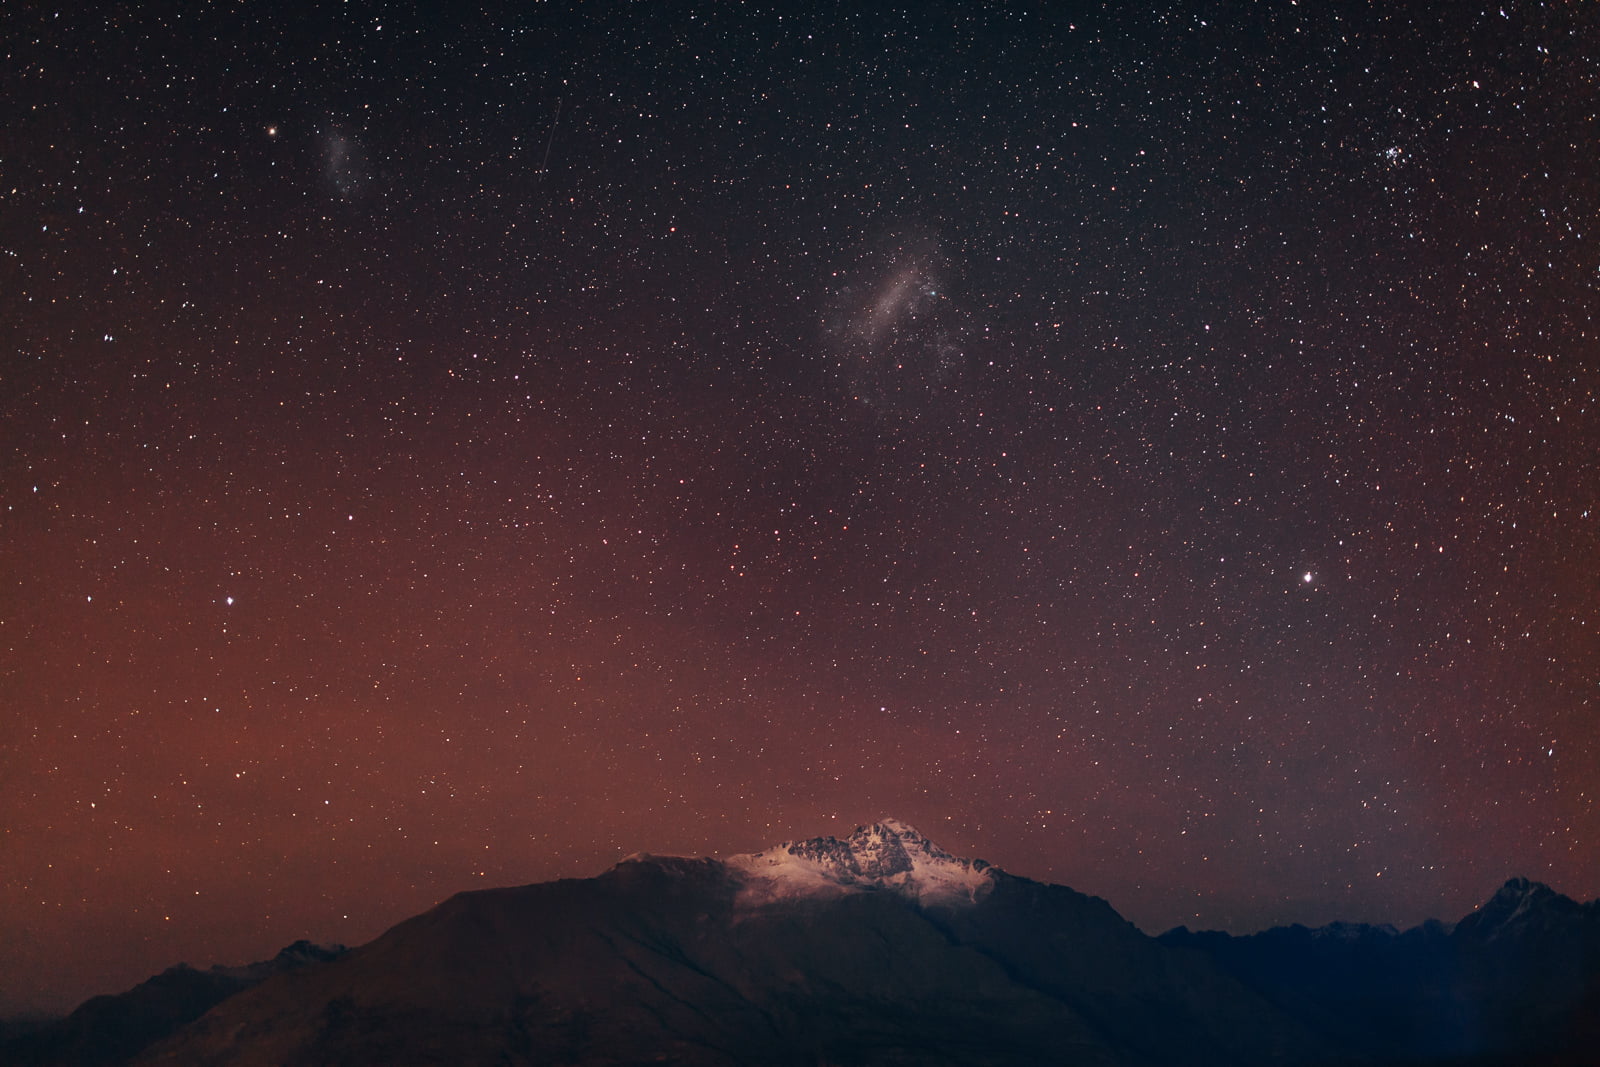 aerial view of mountain under black sky with stars, queenstown, otago